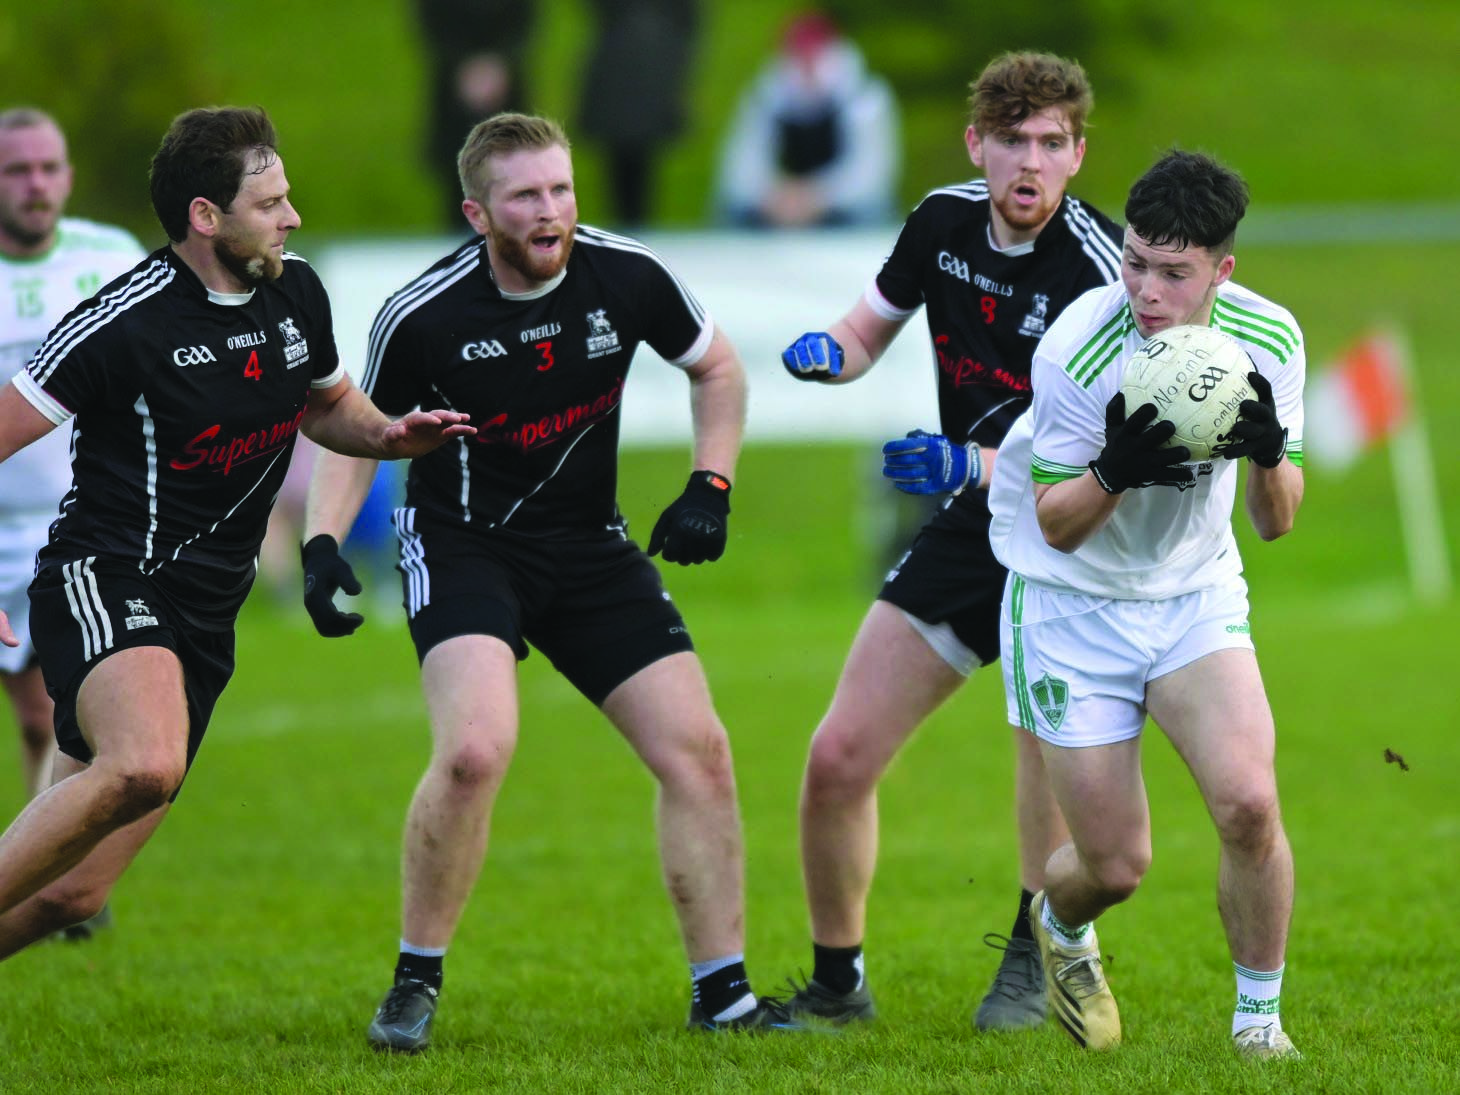 St Comgall’s attacker Tom Patchett tries to get clear of the St Agnes’ defence during Sunday’s Junior Football Championship semi-final at Glenavy